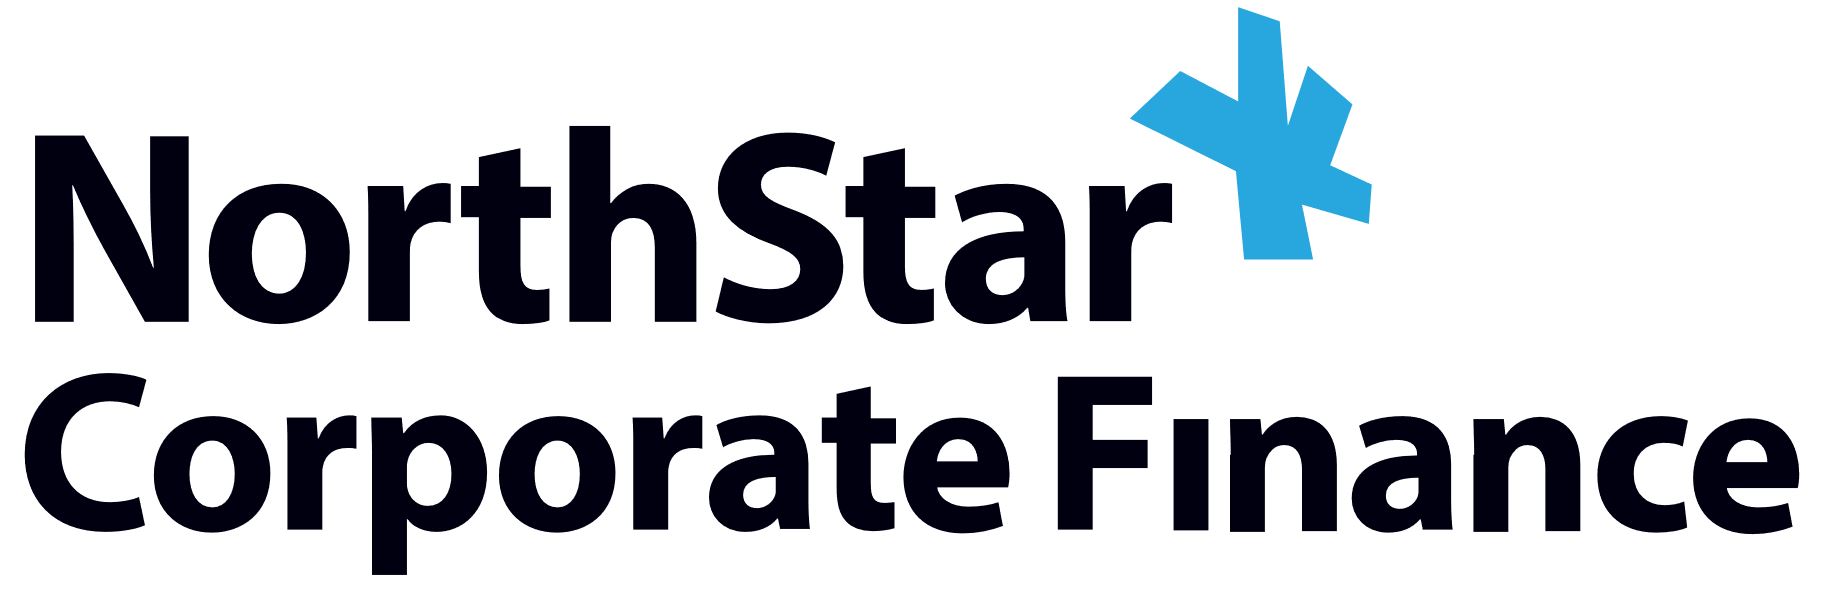 Welcome to NorthStar Corporate Finance, with offices in Stuttgart, Prague and Moscow